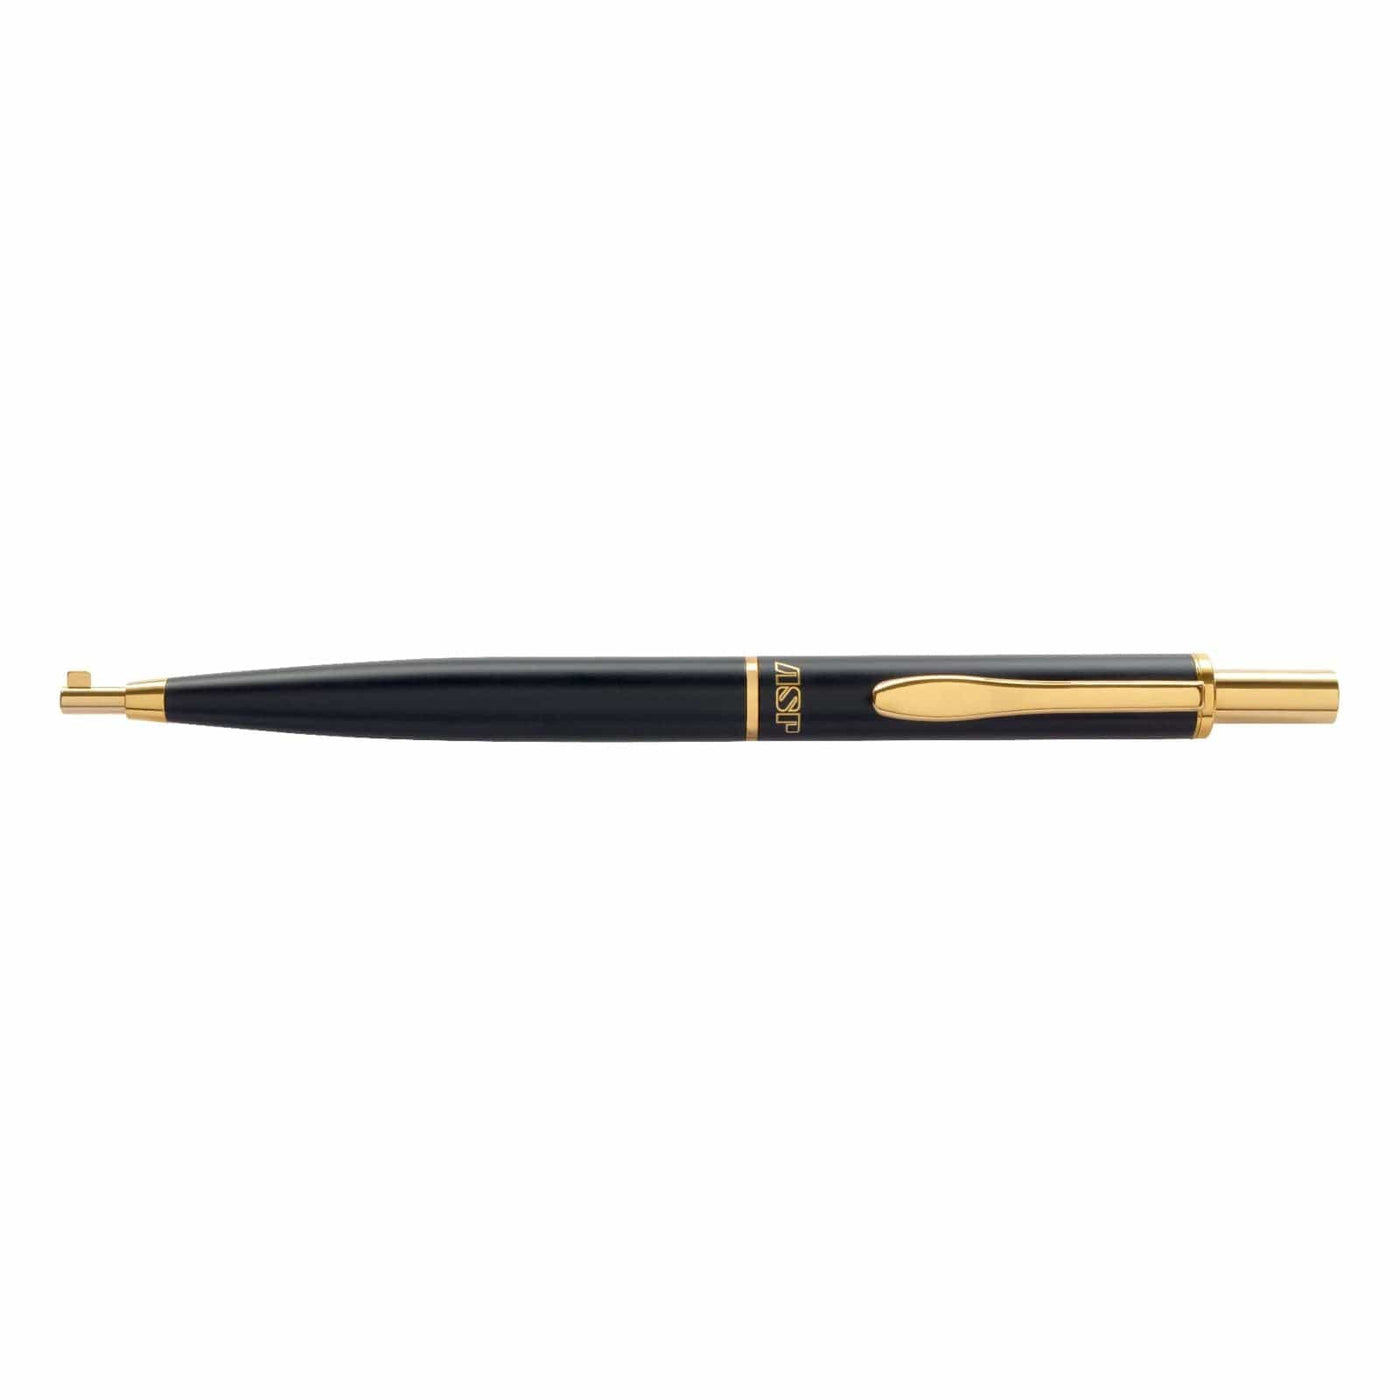 ASP ASP LockWrite Pen Key Click Accents Gold Public Safety And Le